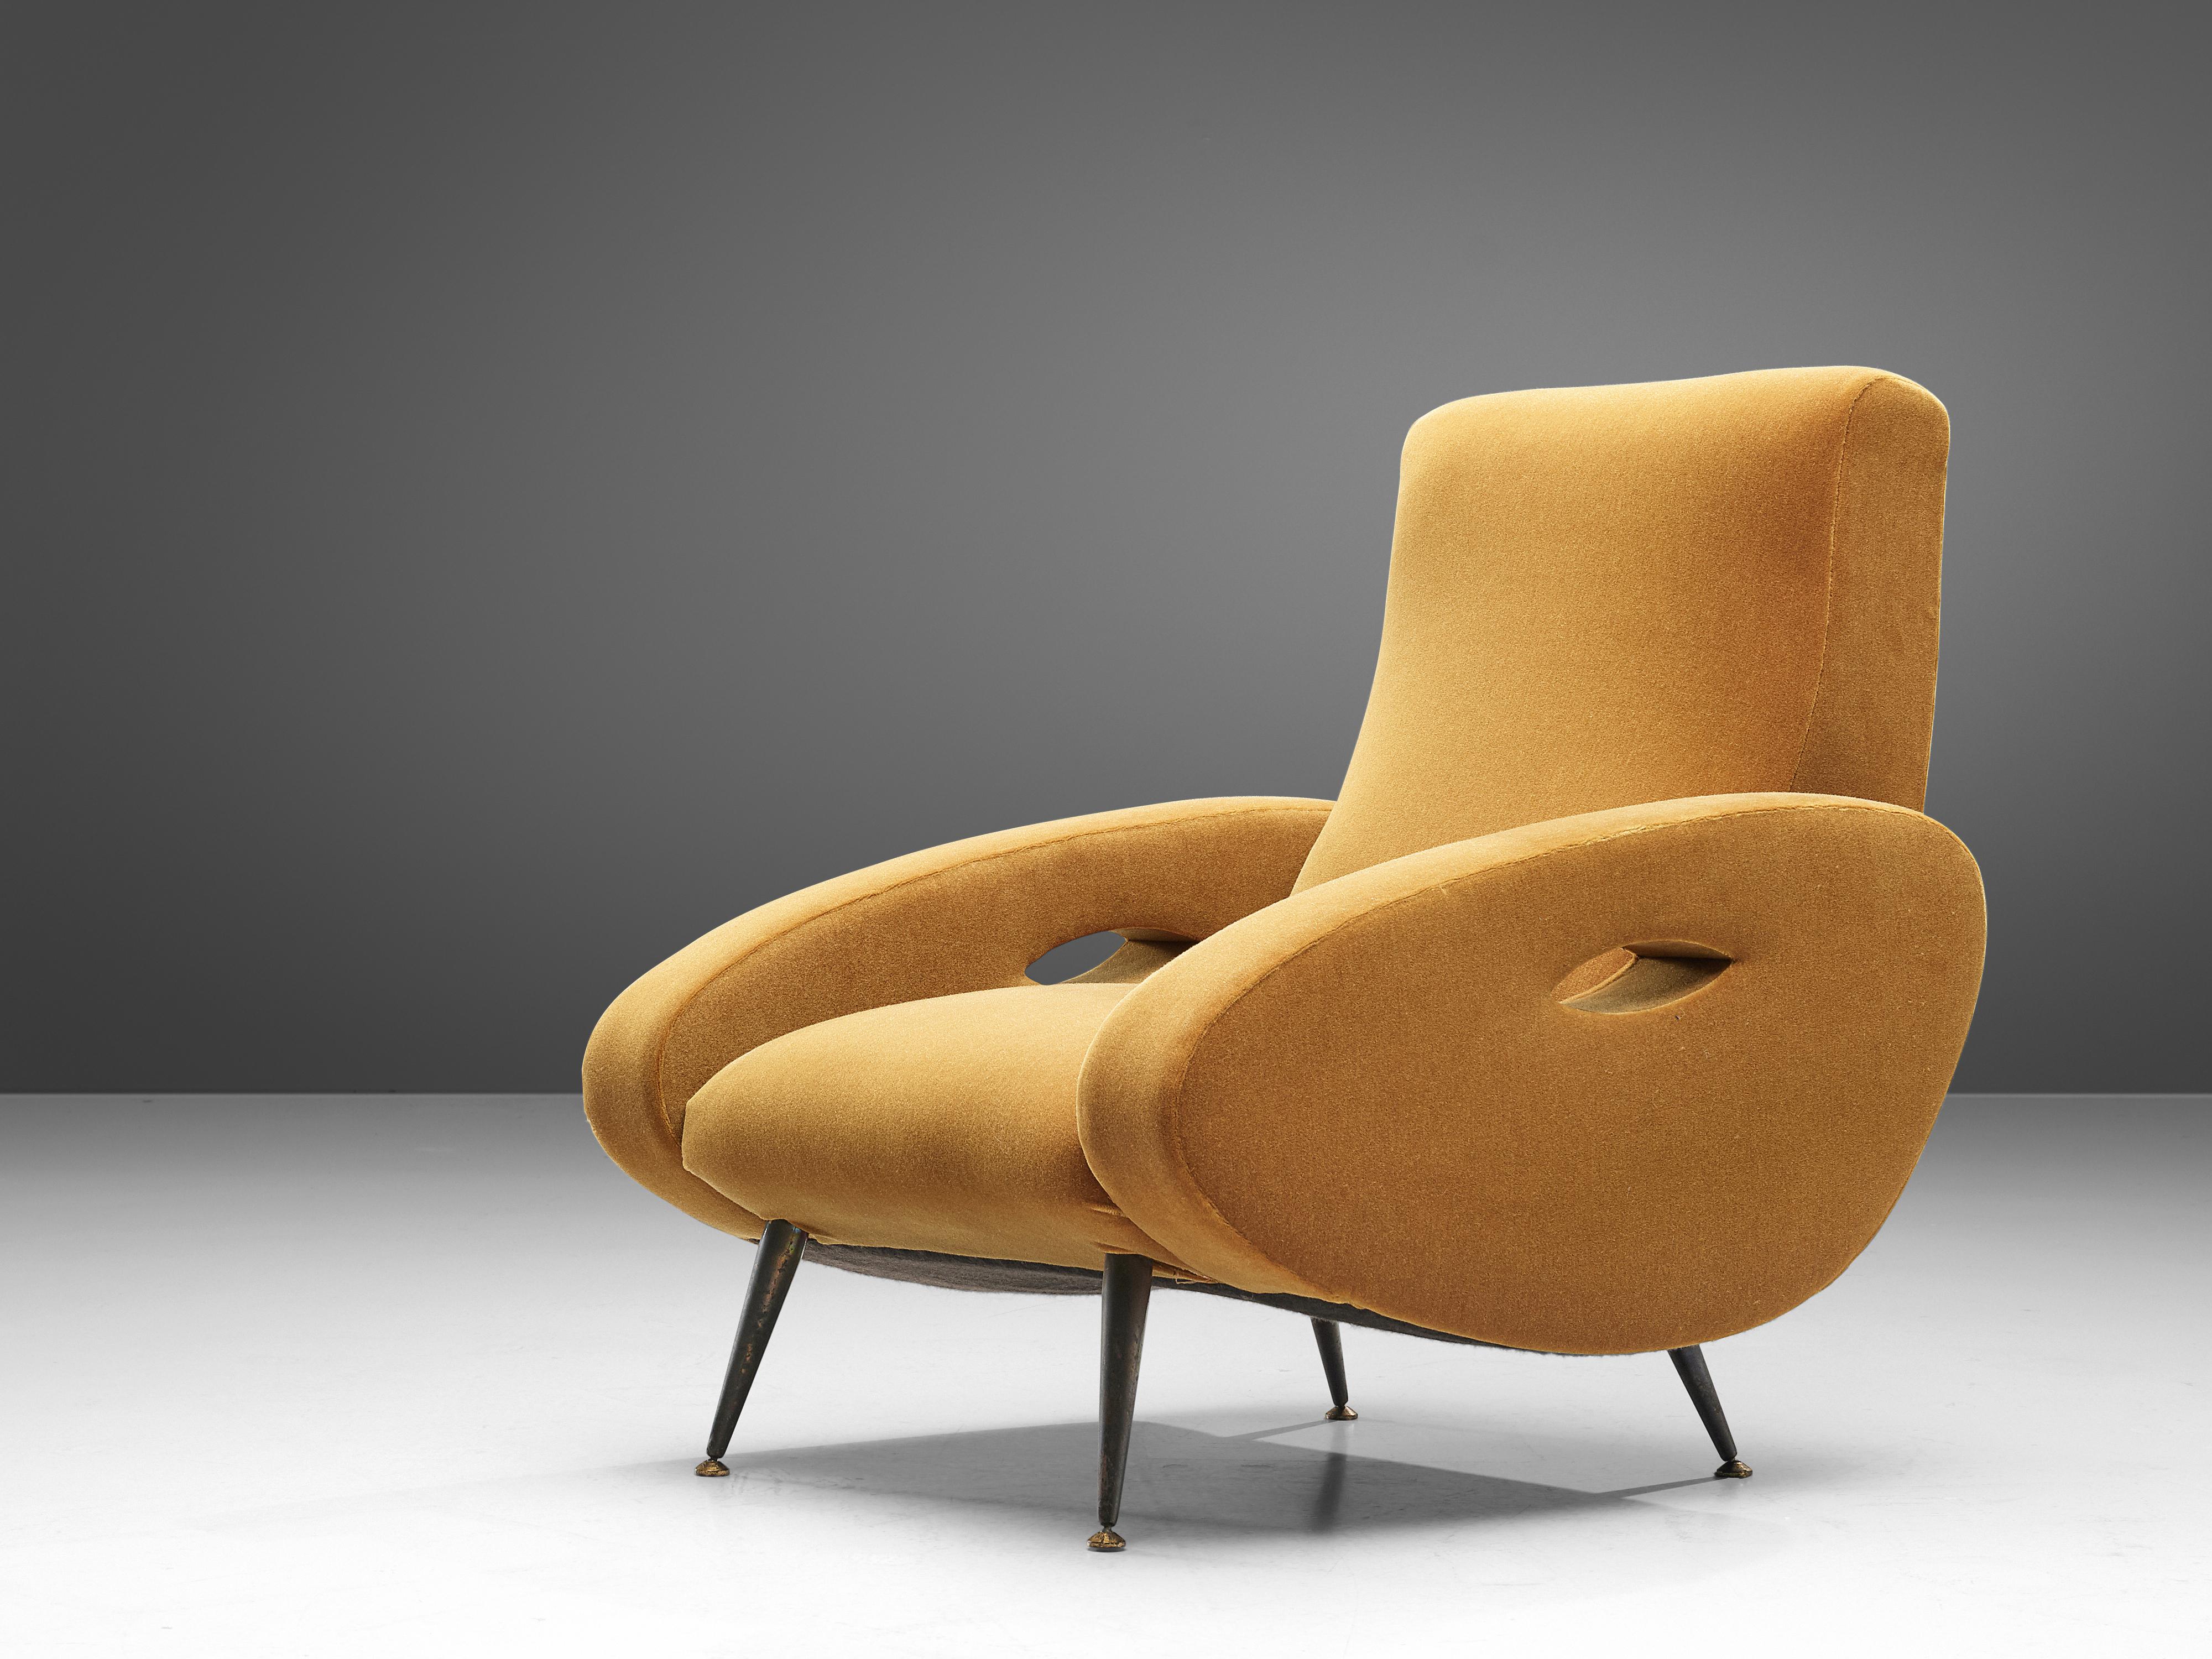 François Letourneur for Maurice Mourra, lounge chair, velvet upholstery, brass, France, 1950s

This lounge chair shows a variety of well designed bold lines which provide each chair with an elegant look that reminds of the American streamlined